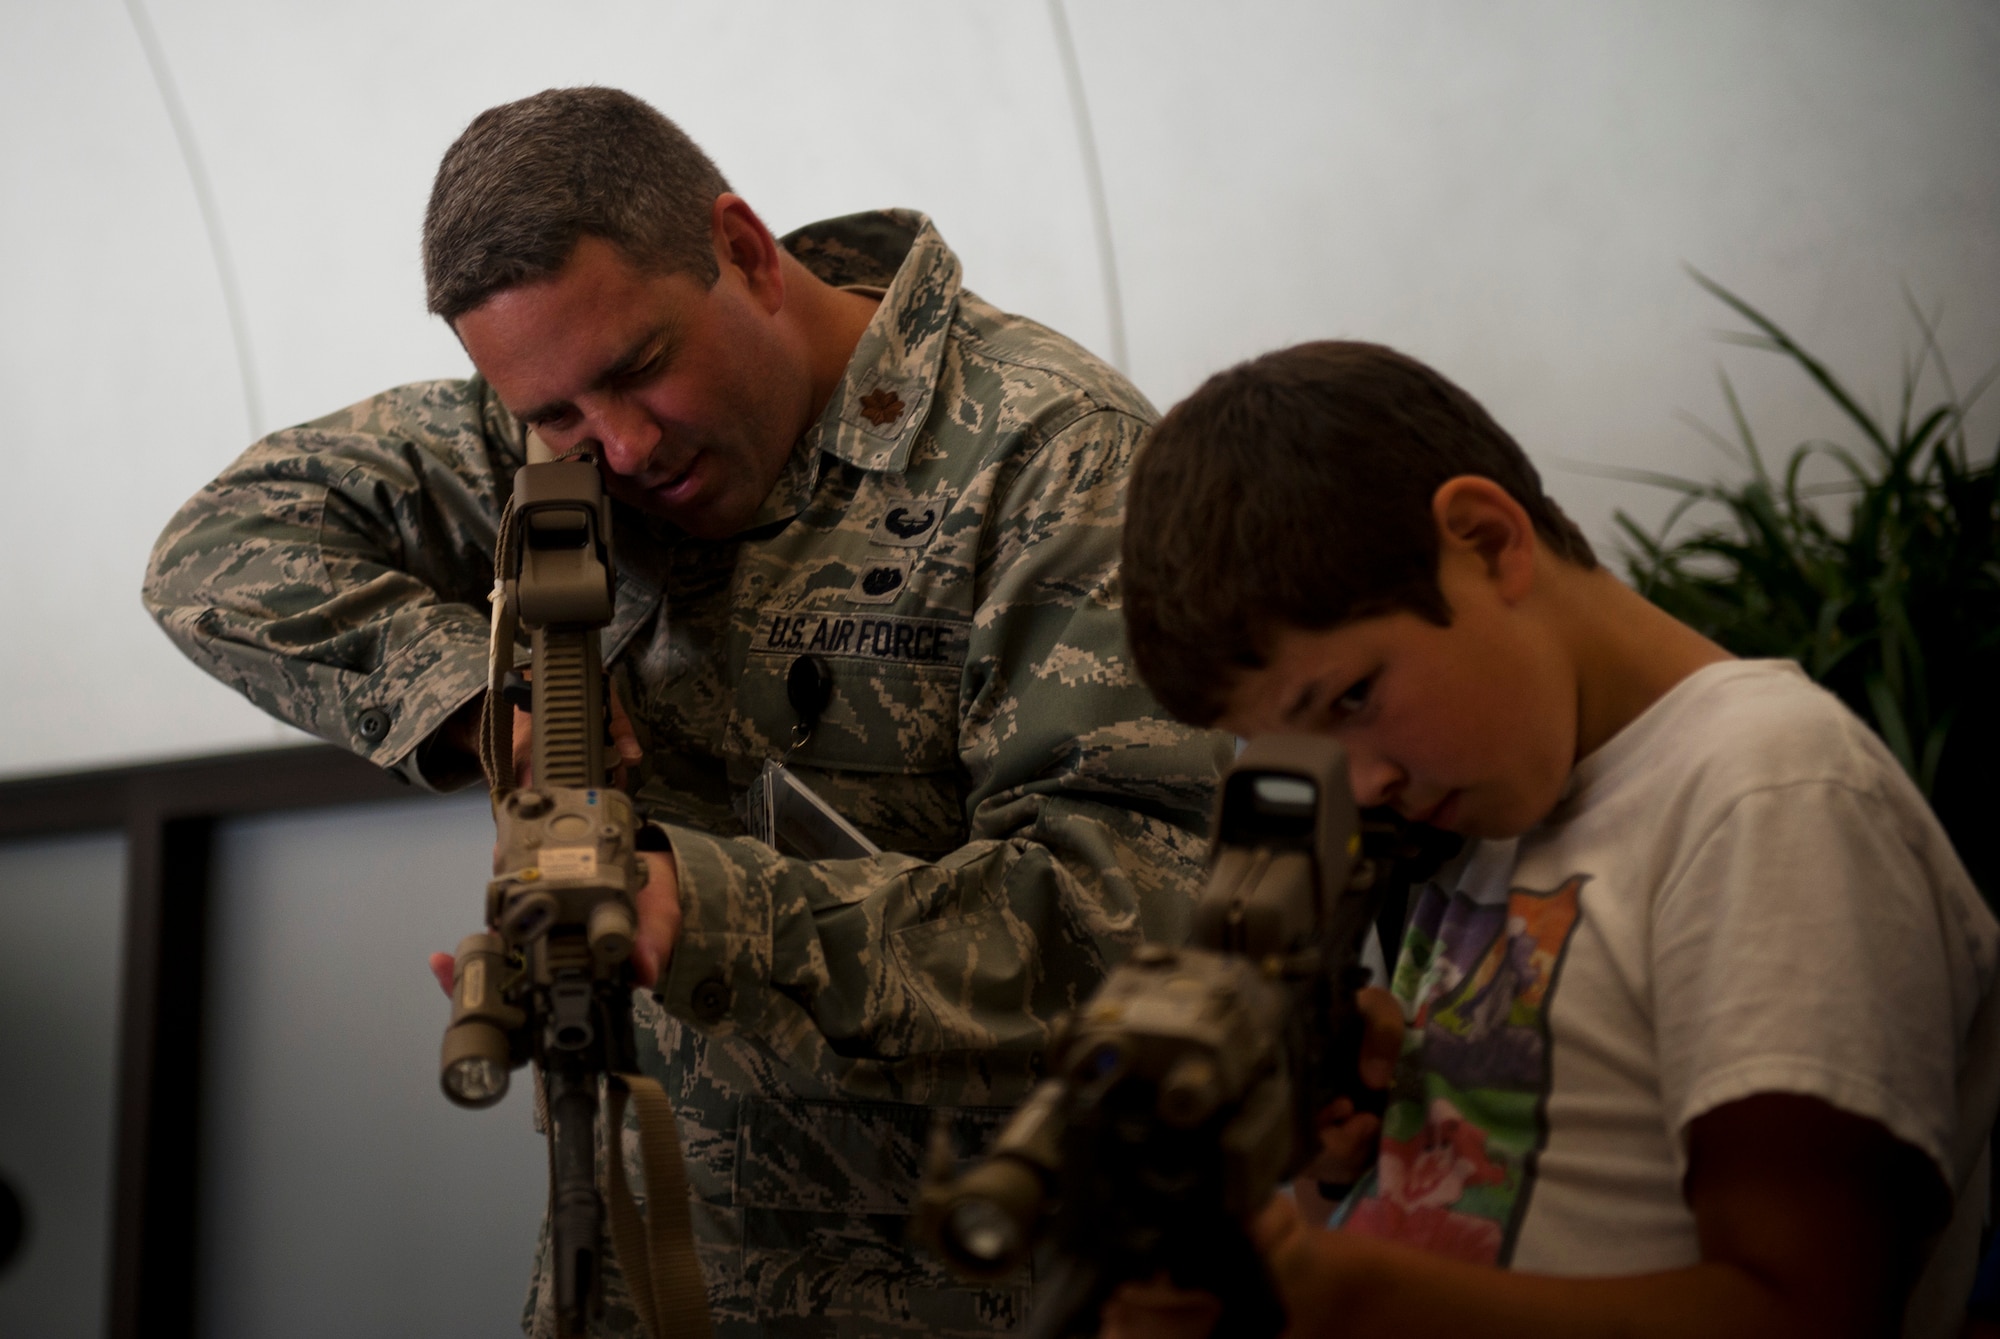 Maj. Bradley Ball, Air Force Special Operations Command Staff Judge Advocate, and son Garrette, 11, look through the optics of weapons commonly used by AFSOC Airmen, June 29, 2012, during AFSOC's Bring Your Child to Work Day at Hurlburt Field, Fla. (U.S. Air Force photo by Staff Sgt. David Salanitri) 